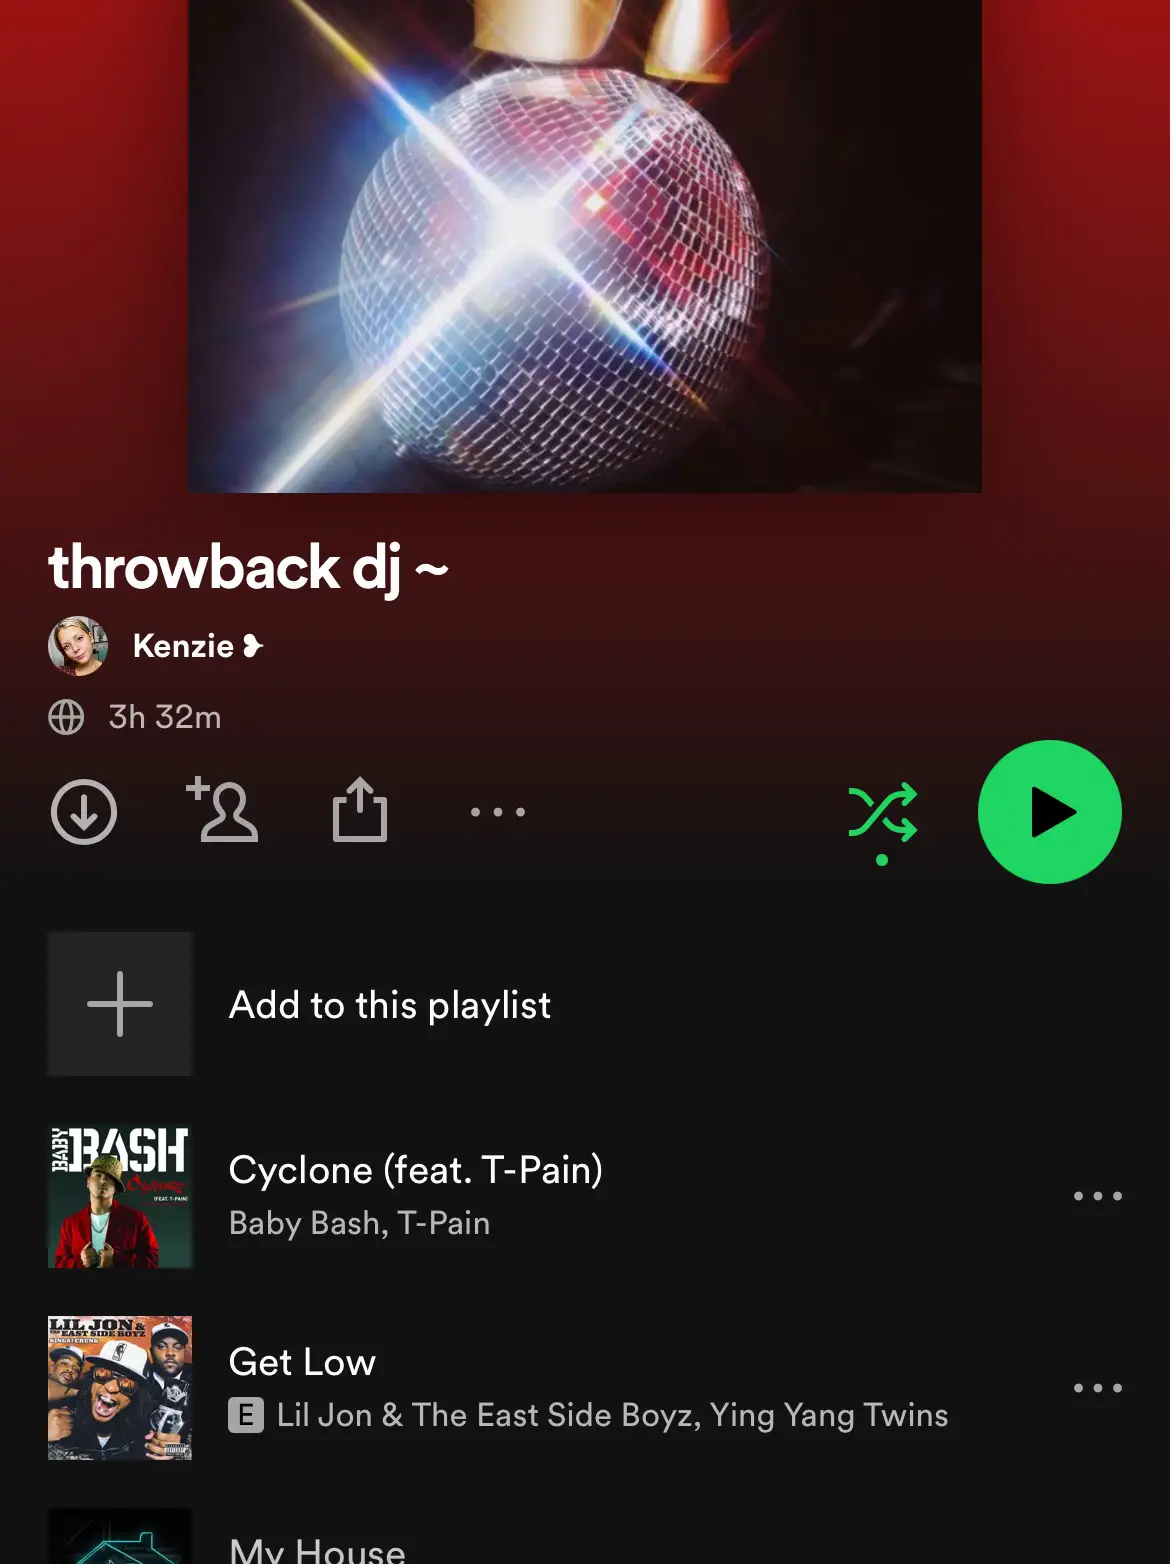  A playlist of music with the words "throwback dj